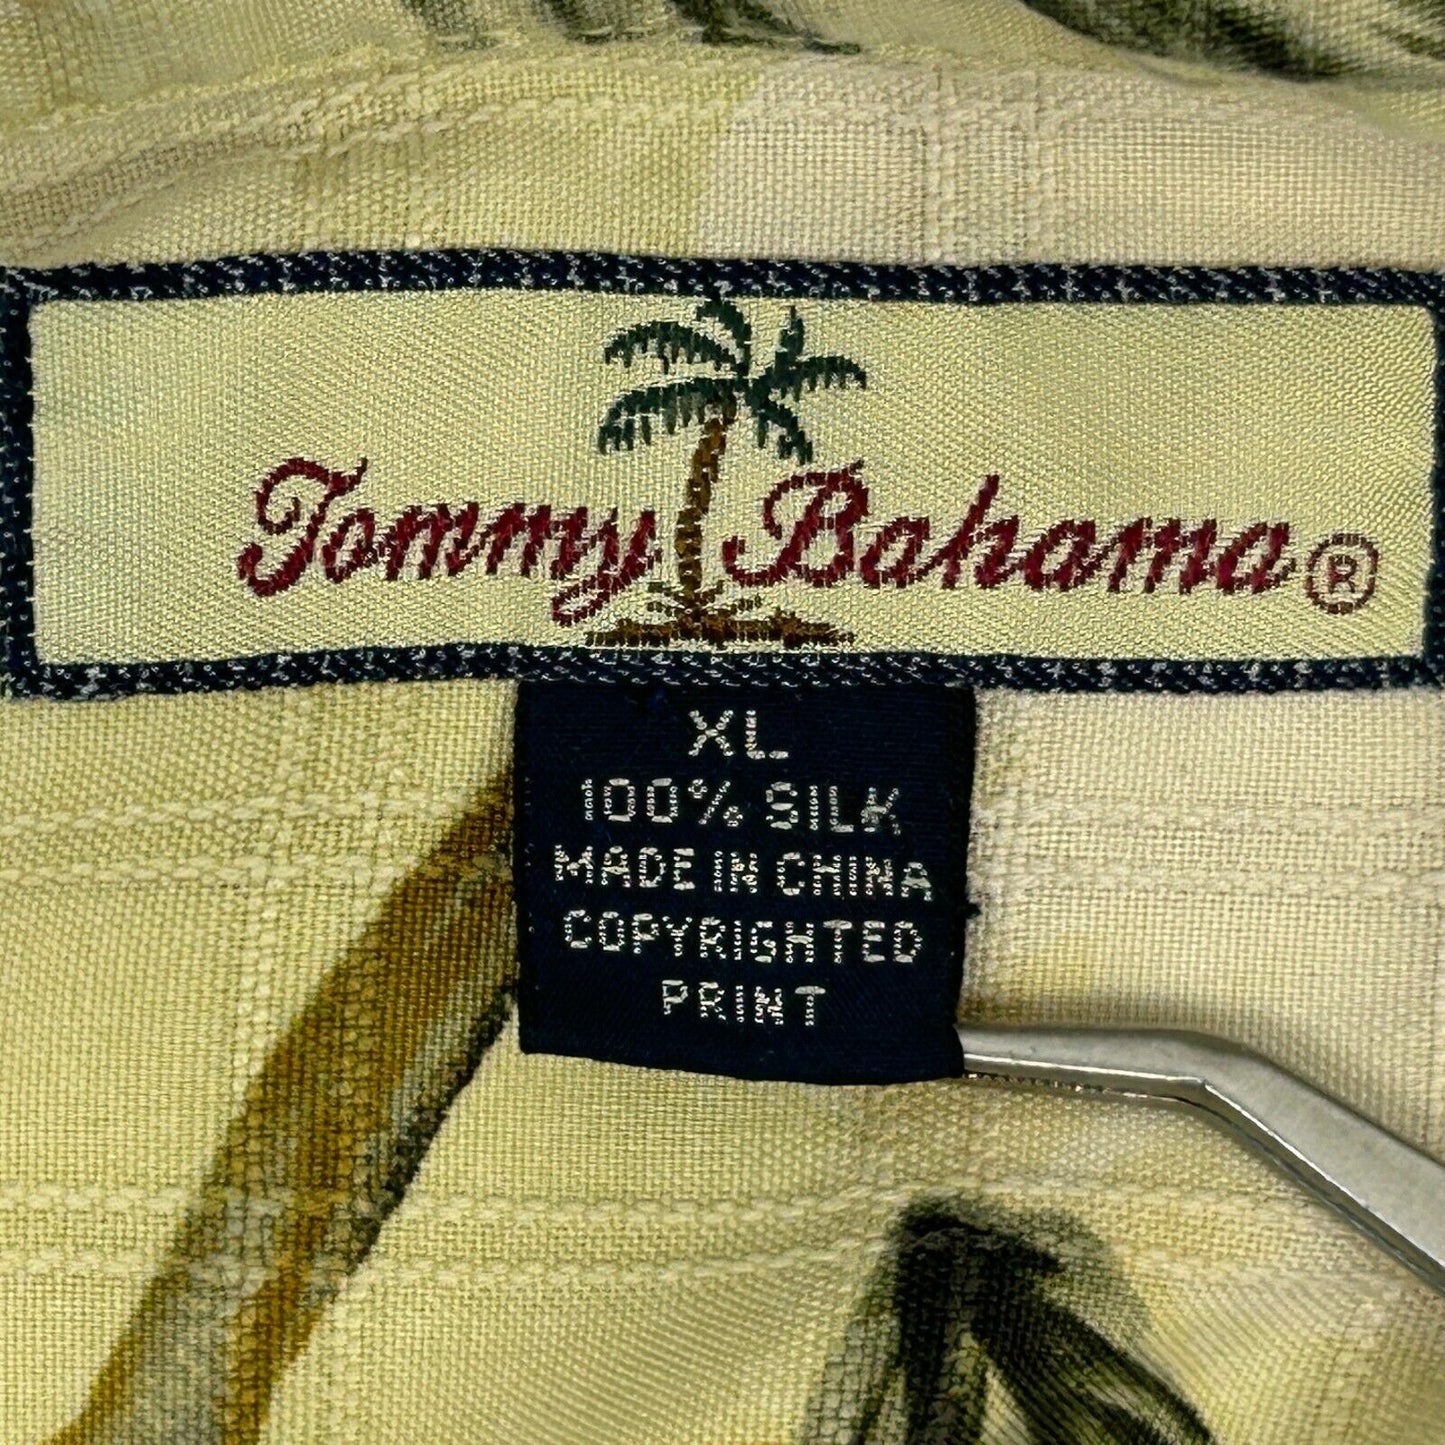 Tommy Bahama Silk Hawaiian Button Front Camp Shirt Yellow Flowers Floral XL